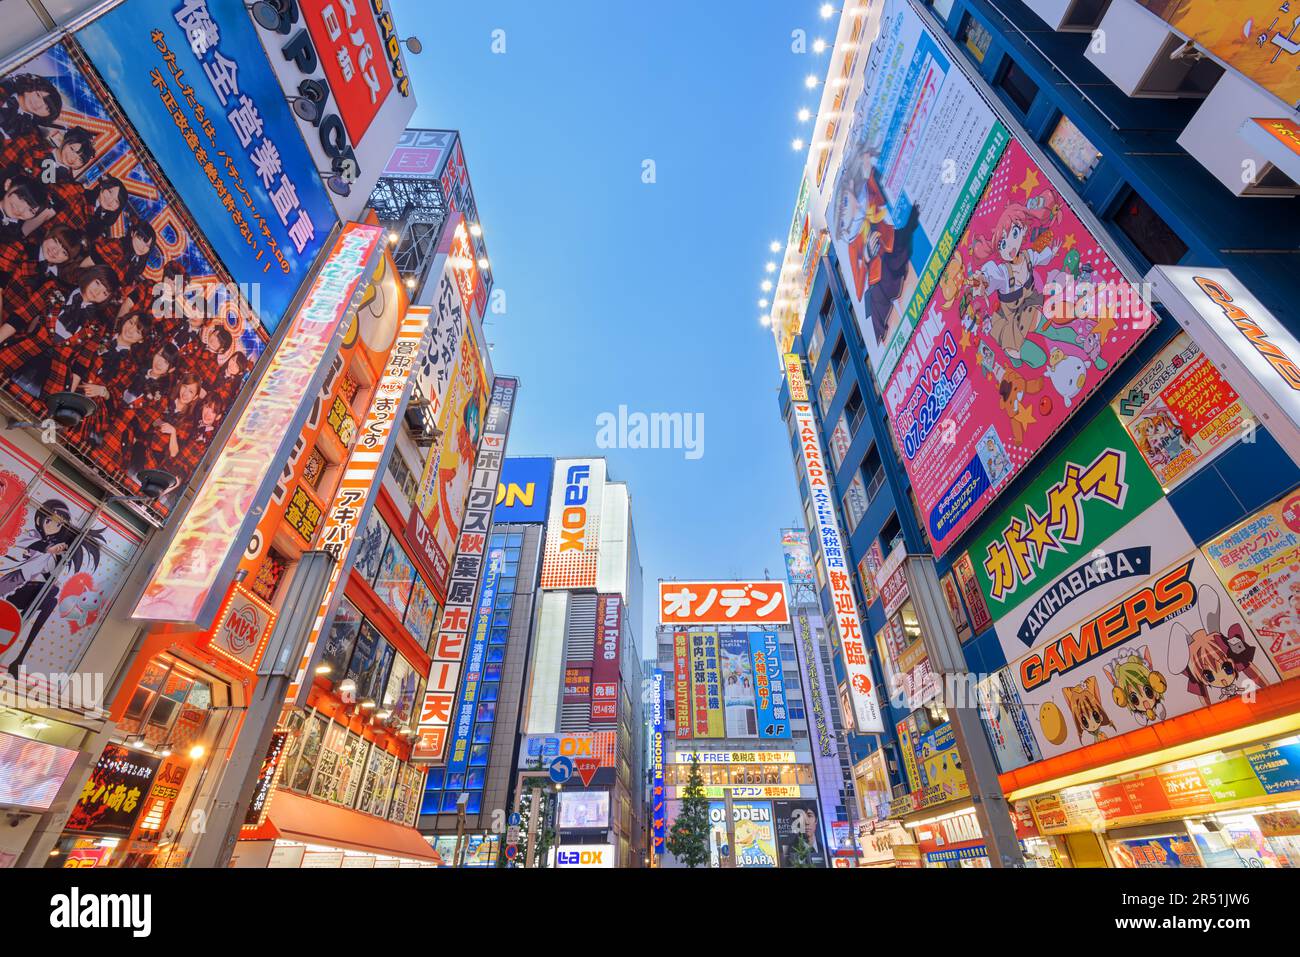 TOKYO, JAPAN - AUGUST 1, 2015: The Akihabara electronics district is a shopping area for video games, anime, manga, and computer goods. Stock Photo